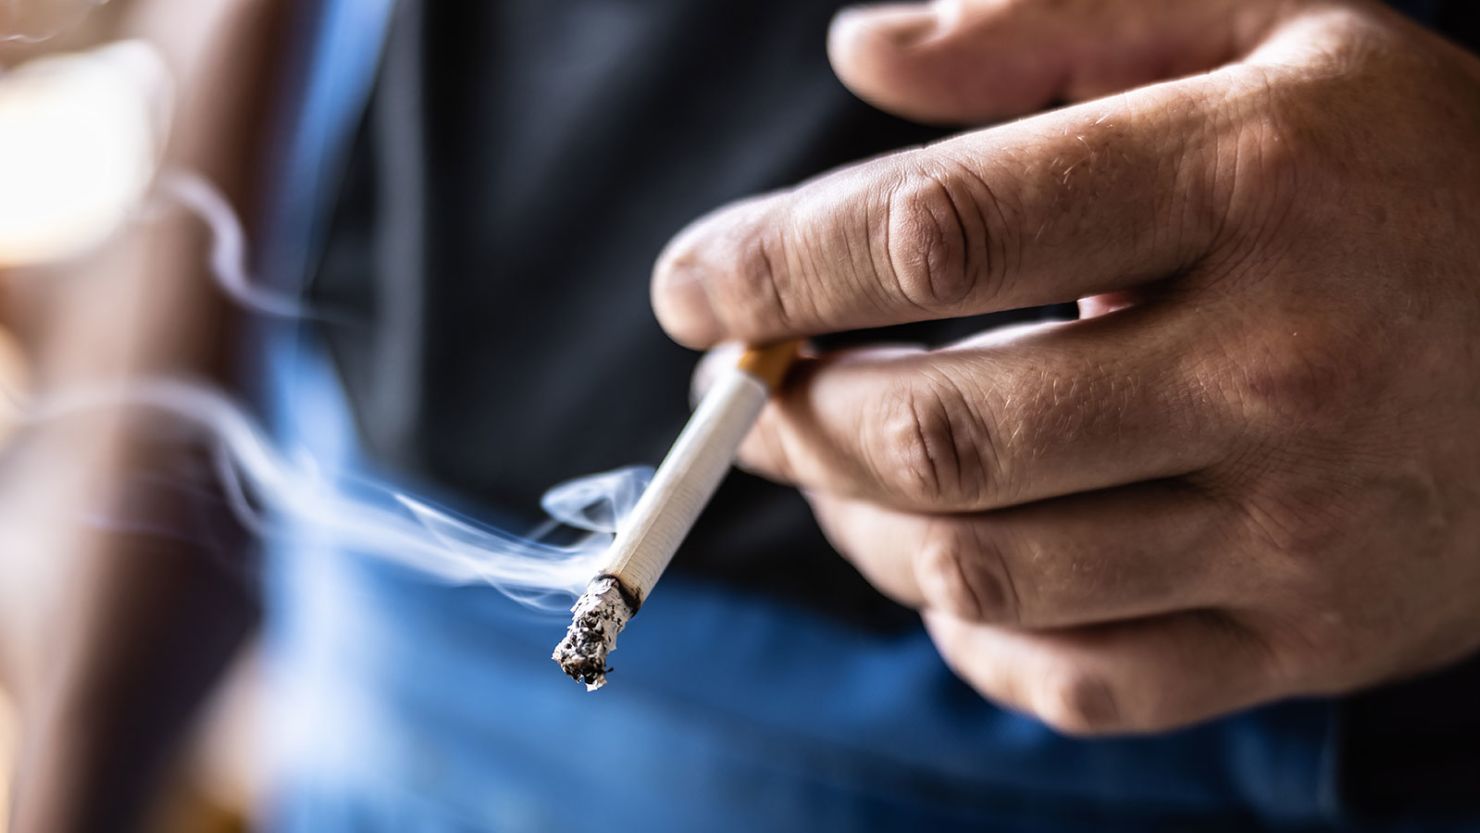 Rather than help weight loss, smoking leads to more abdominal fat, a new study found.